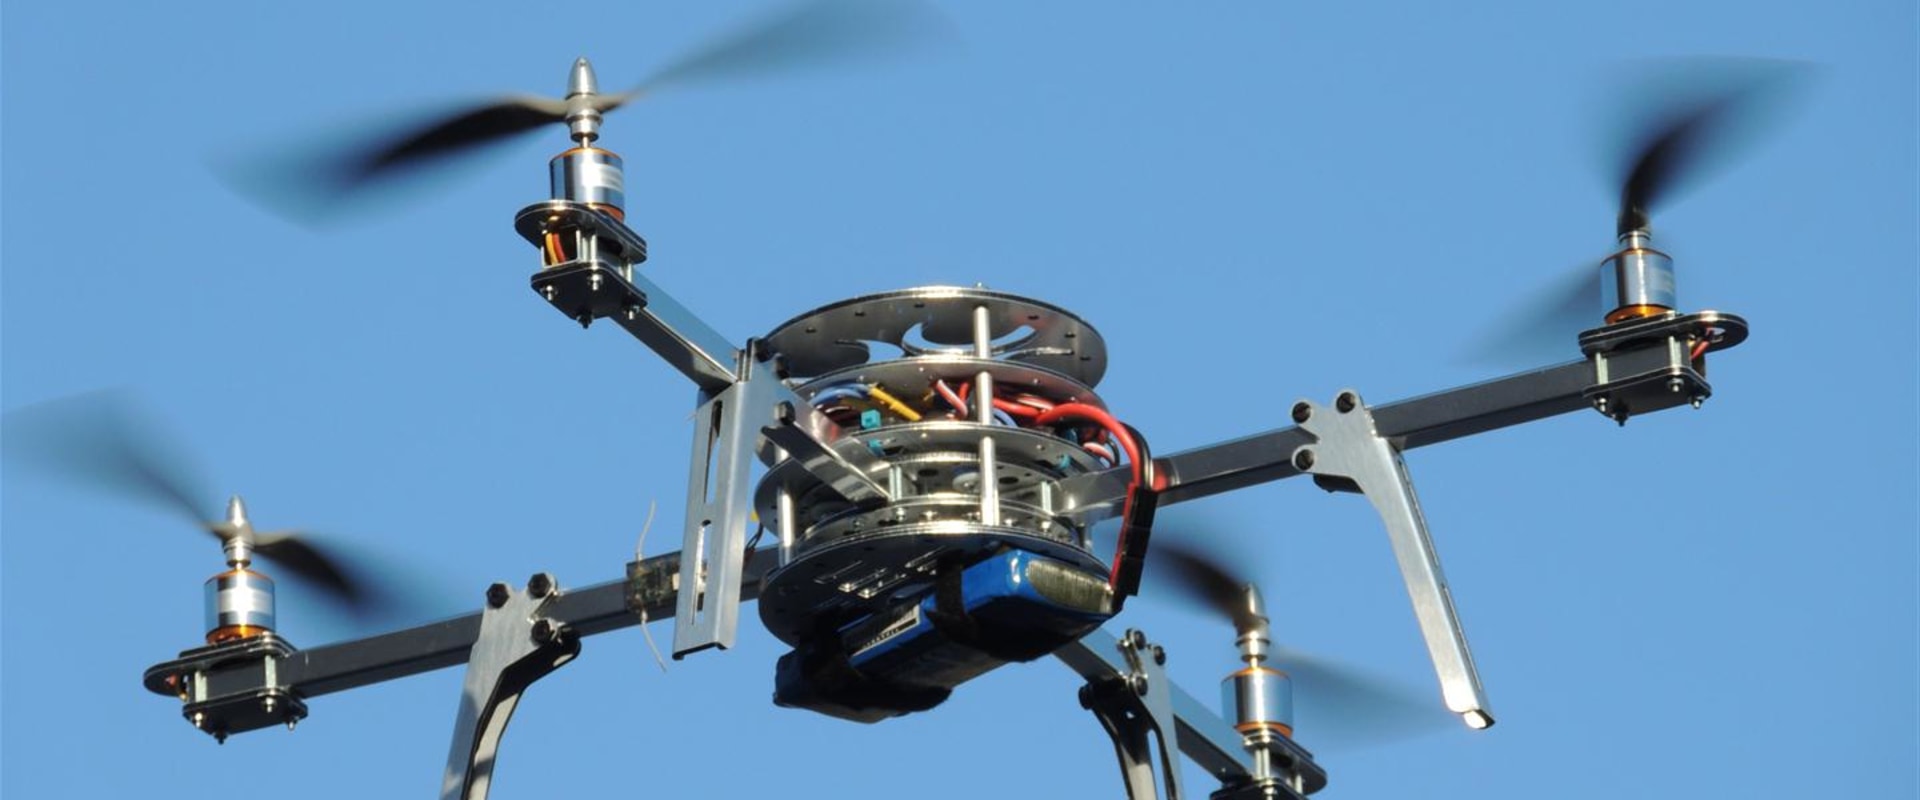 Features to Look for in a Quadcopter